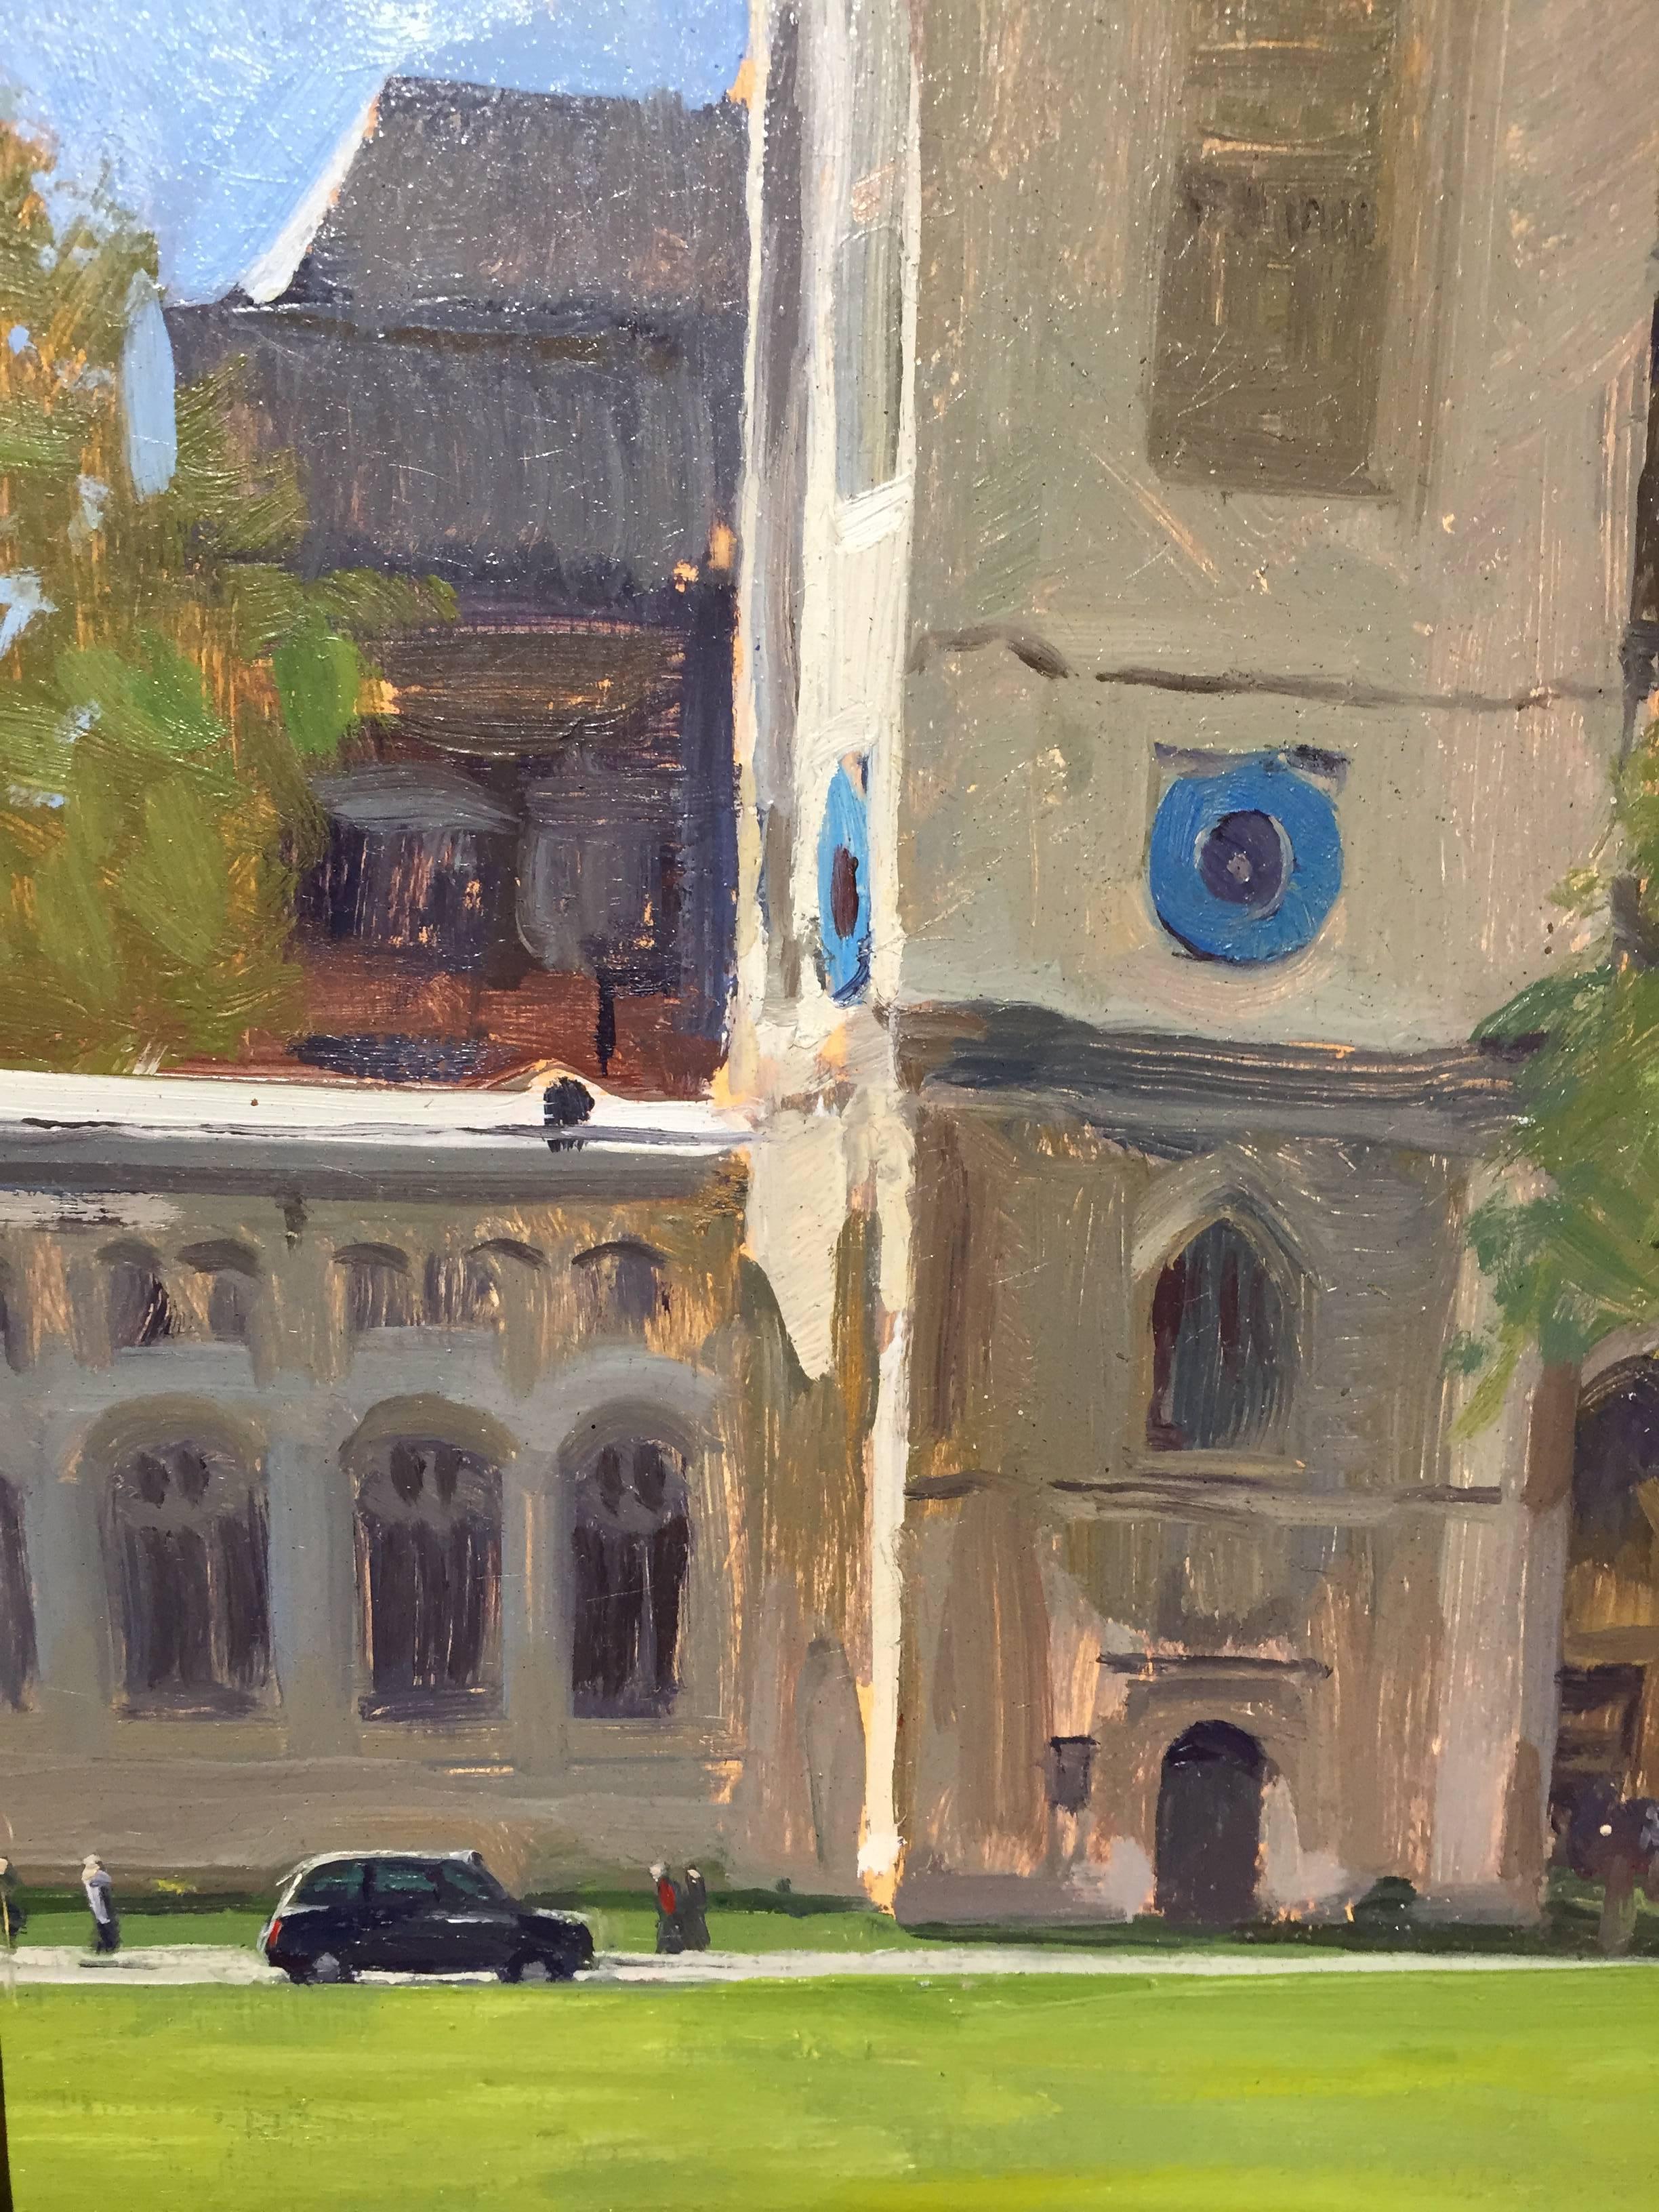 Painted en-plein air Marc Dalessio centers his focus on the tall rectangular facade, light hitting the left side and towers over a small european car parked in the foreground. 2 trees filled with green leaves connote the time of year as springtime